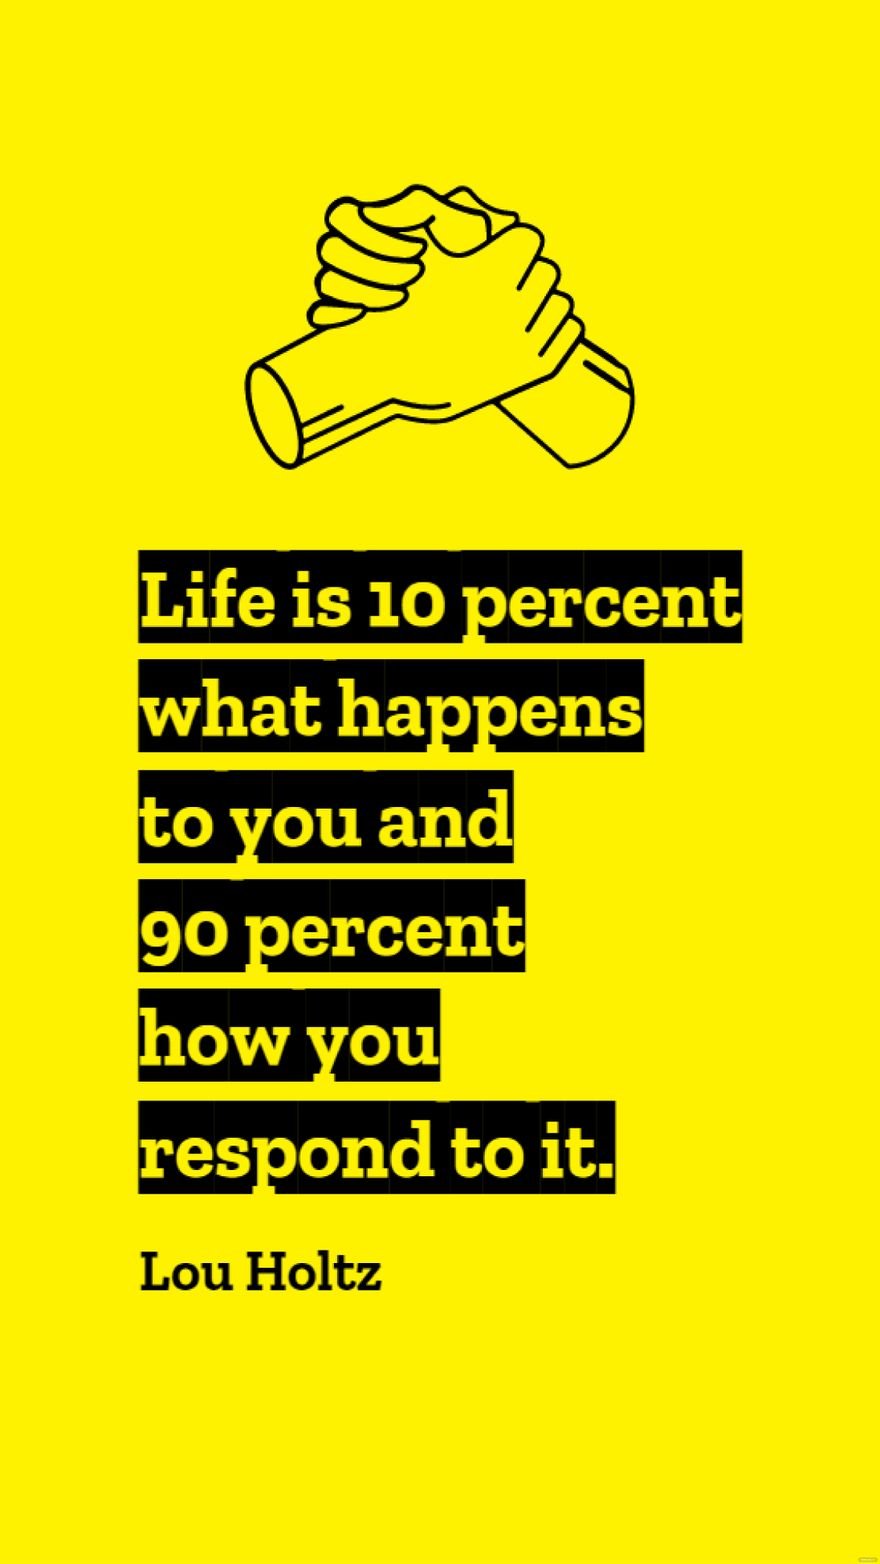 Free Lou Holtz - Life is 10 percent what happens to you and 90 percent how you respond to it. in JPG